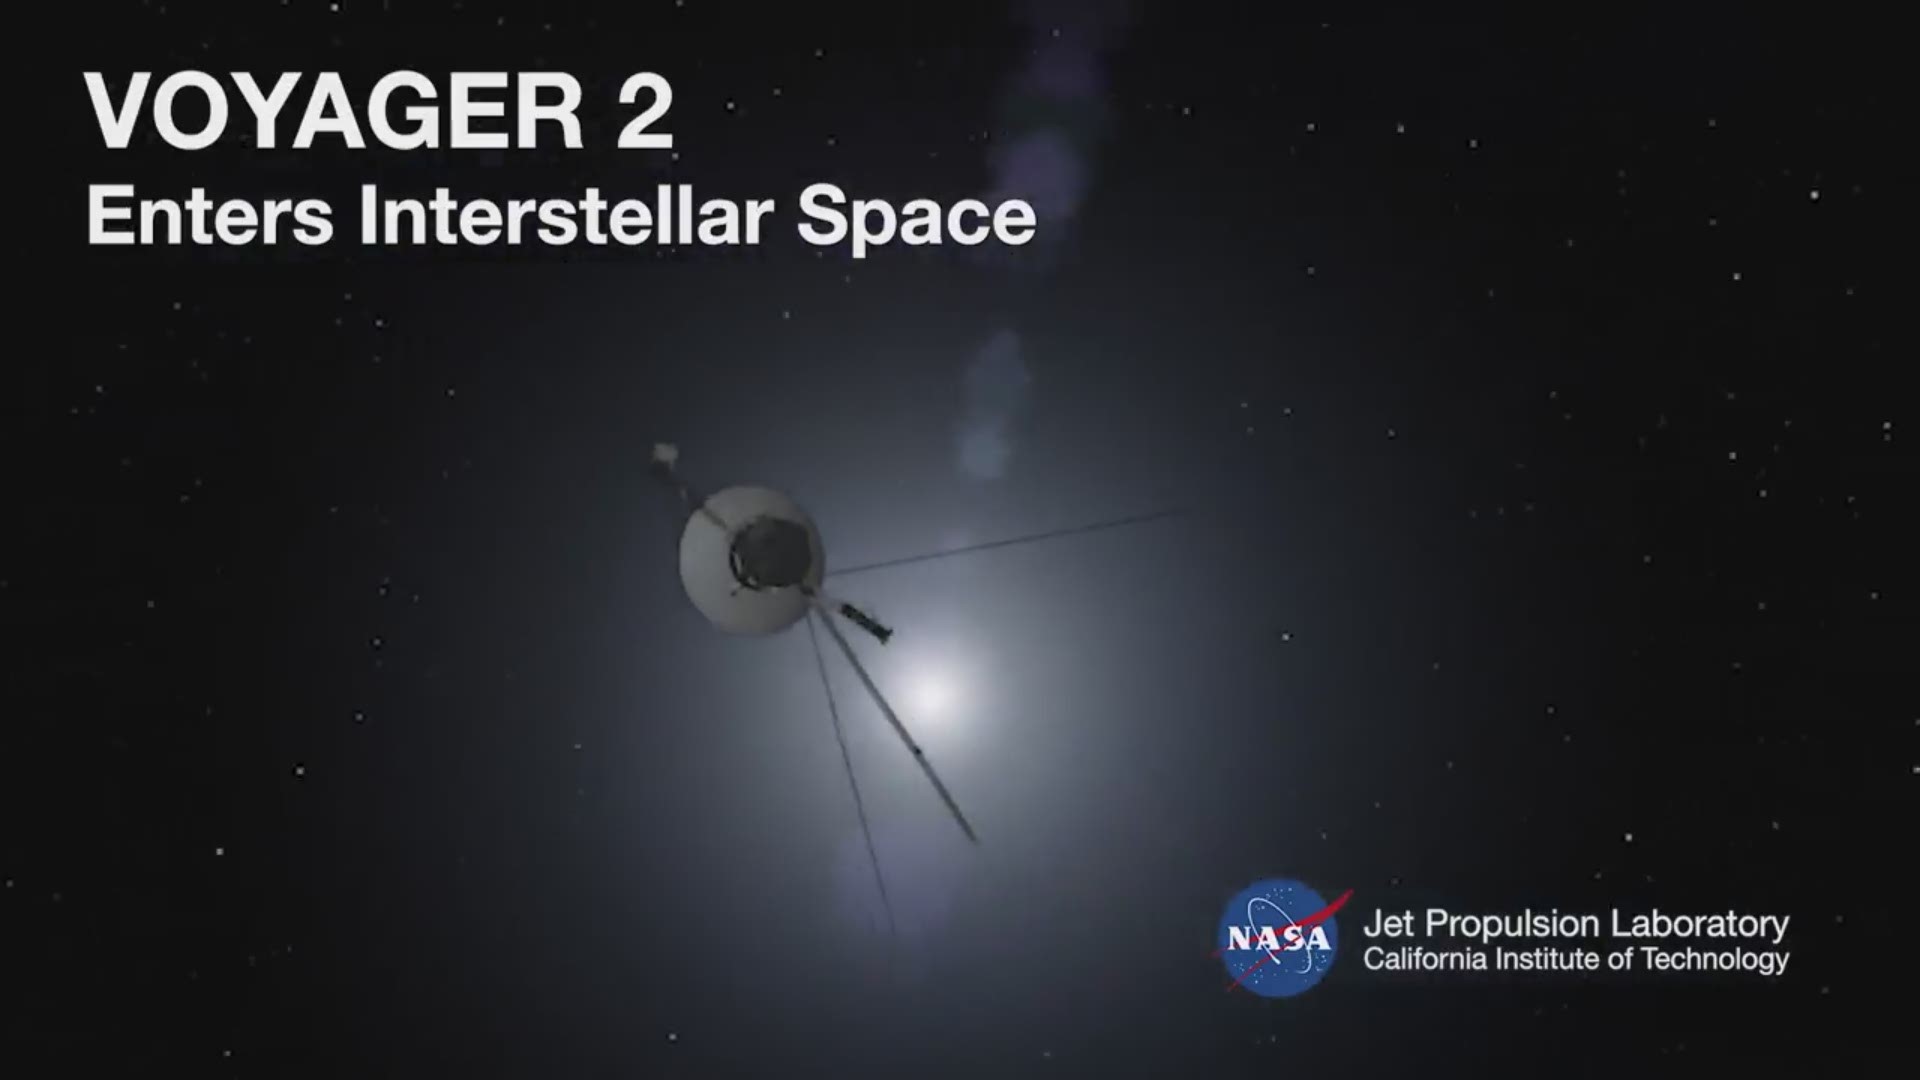 For the second time in history, a human-made object has reached the space between the stars. NASA's Voyager 2 probe now has exited the heliosphere - the protective bubble of particles and magnetic fields created by the Sun. (NASA)